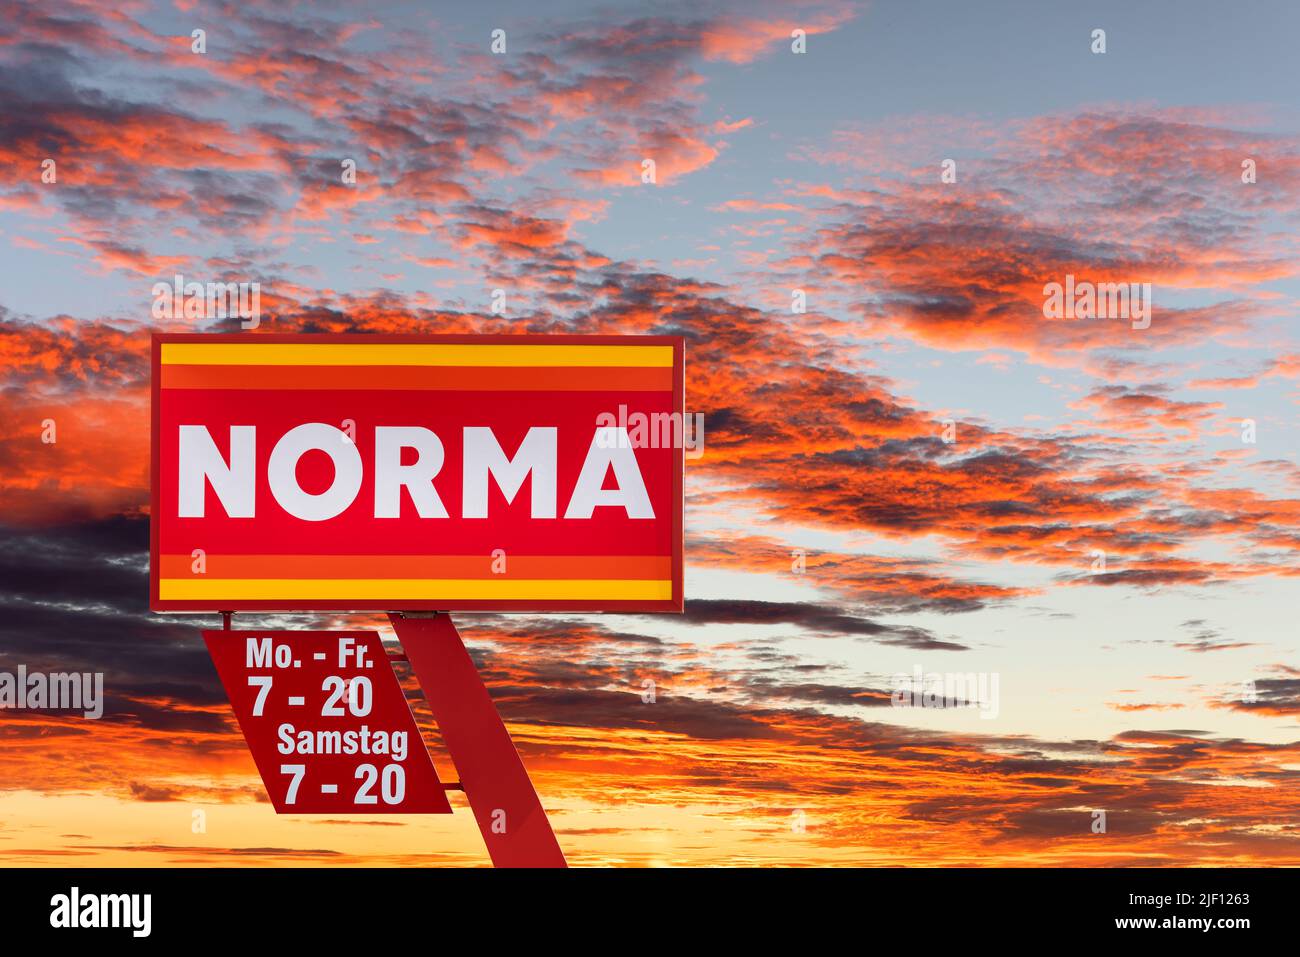 AUGSBURG, GERMANY – JUNE 16, 2022: Advertising sign of the discounter store NORMA in front of a sky with clouds Stock Photo